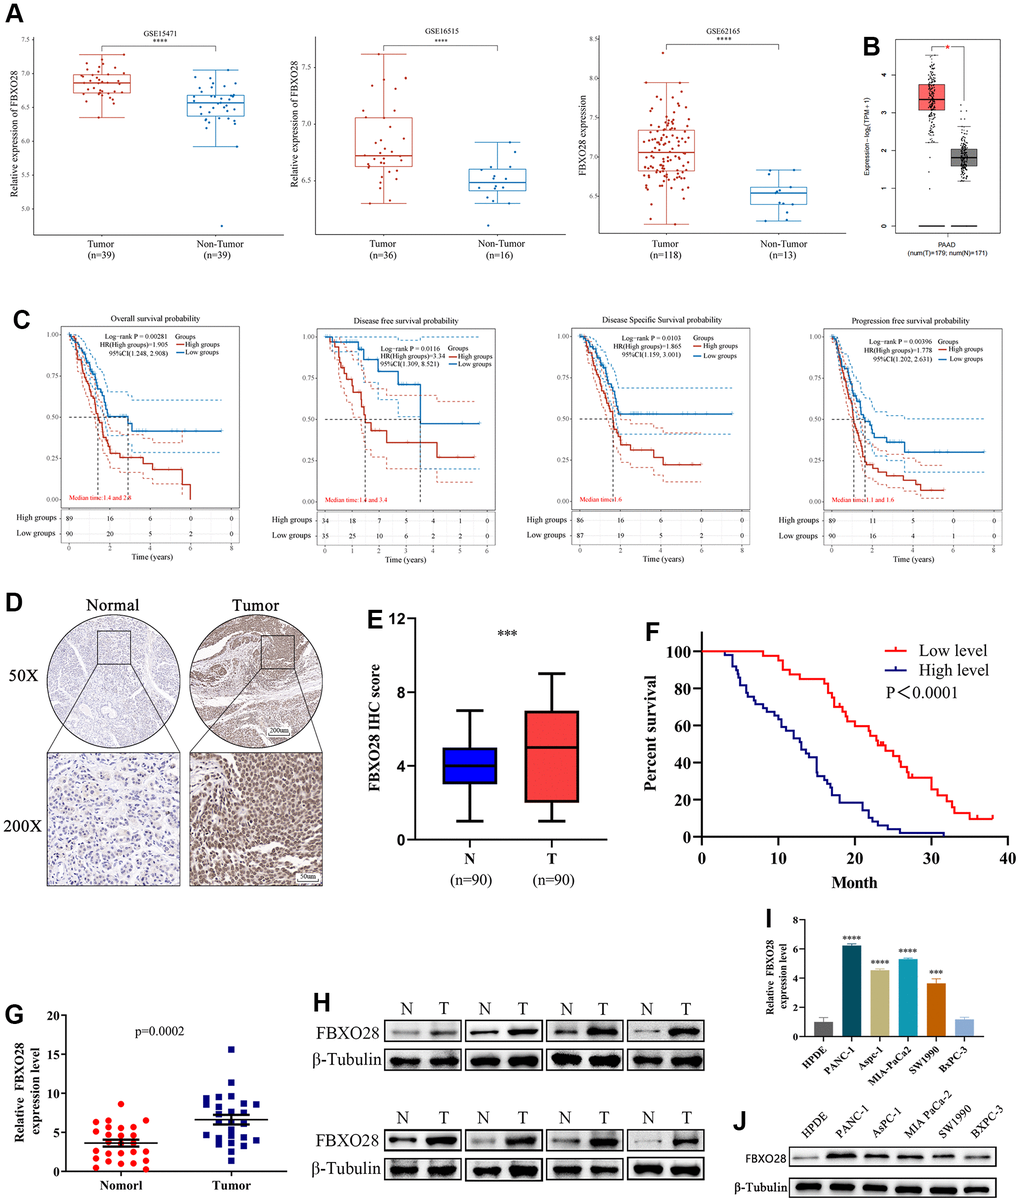 FBXO28 is overexpressed in pancreatic cancer and is associated with poor prognosis. (A, B) In the GSE15471, GSE16515, GSE62165, and GEPIA2 datasets, pancreatic cancer (PC) tissue specimens had substantially higher levels of FBXO28 expression than paracancerous tissue specimens. (C) Based on data from The Cancer Genome Atlas database, Kaplan–Meier analysis reveals that FBXO28 expression is associated with overall survival (OS), disease-free survival (DFS), disease-specific survival (DSS), and progression-free survival (PFS) in patients with PC. (D, E) Typical IHC images show high expression of FBXO28 in pancreatic cancer tissues (magnification: ×50, ×200). (F) Kaplan–Meier survival curves for high and low expression of FBXO28 in patients with PC. (G, H) FBXO28 expression in PC and paracancerous tissues detected by qRT-PCR and western blot. (I, J) FBXO28 expression in five PC cells was examined using qRT-PCR and western blot analysis, with β-tubulin serving as a control variable. ***P 